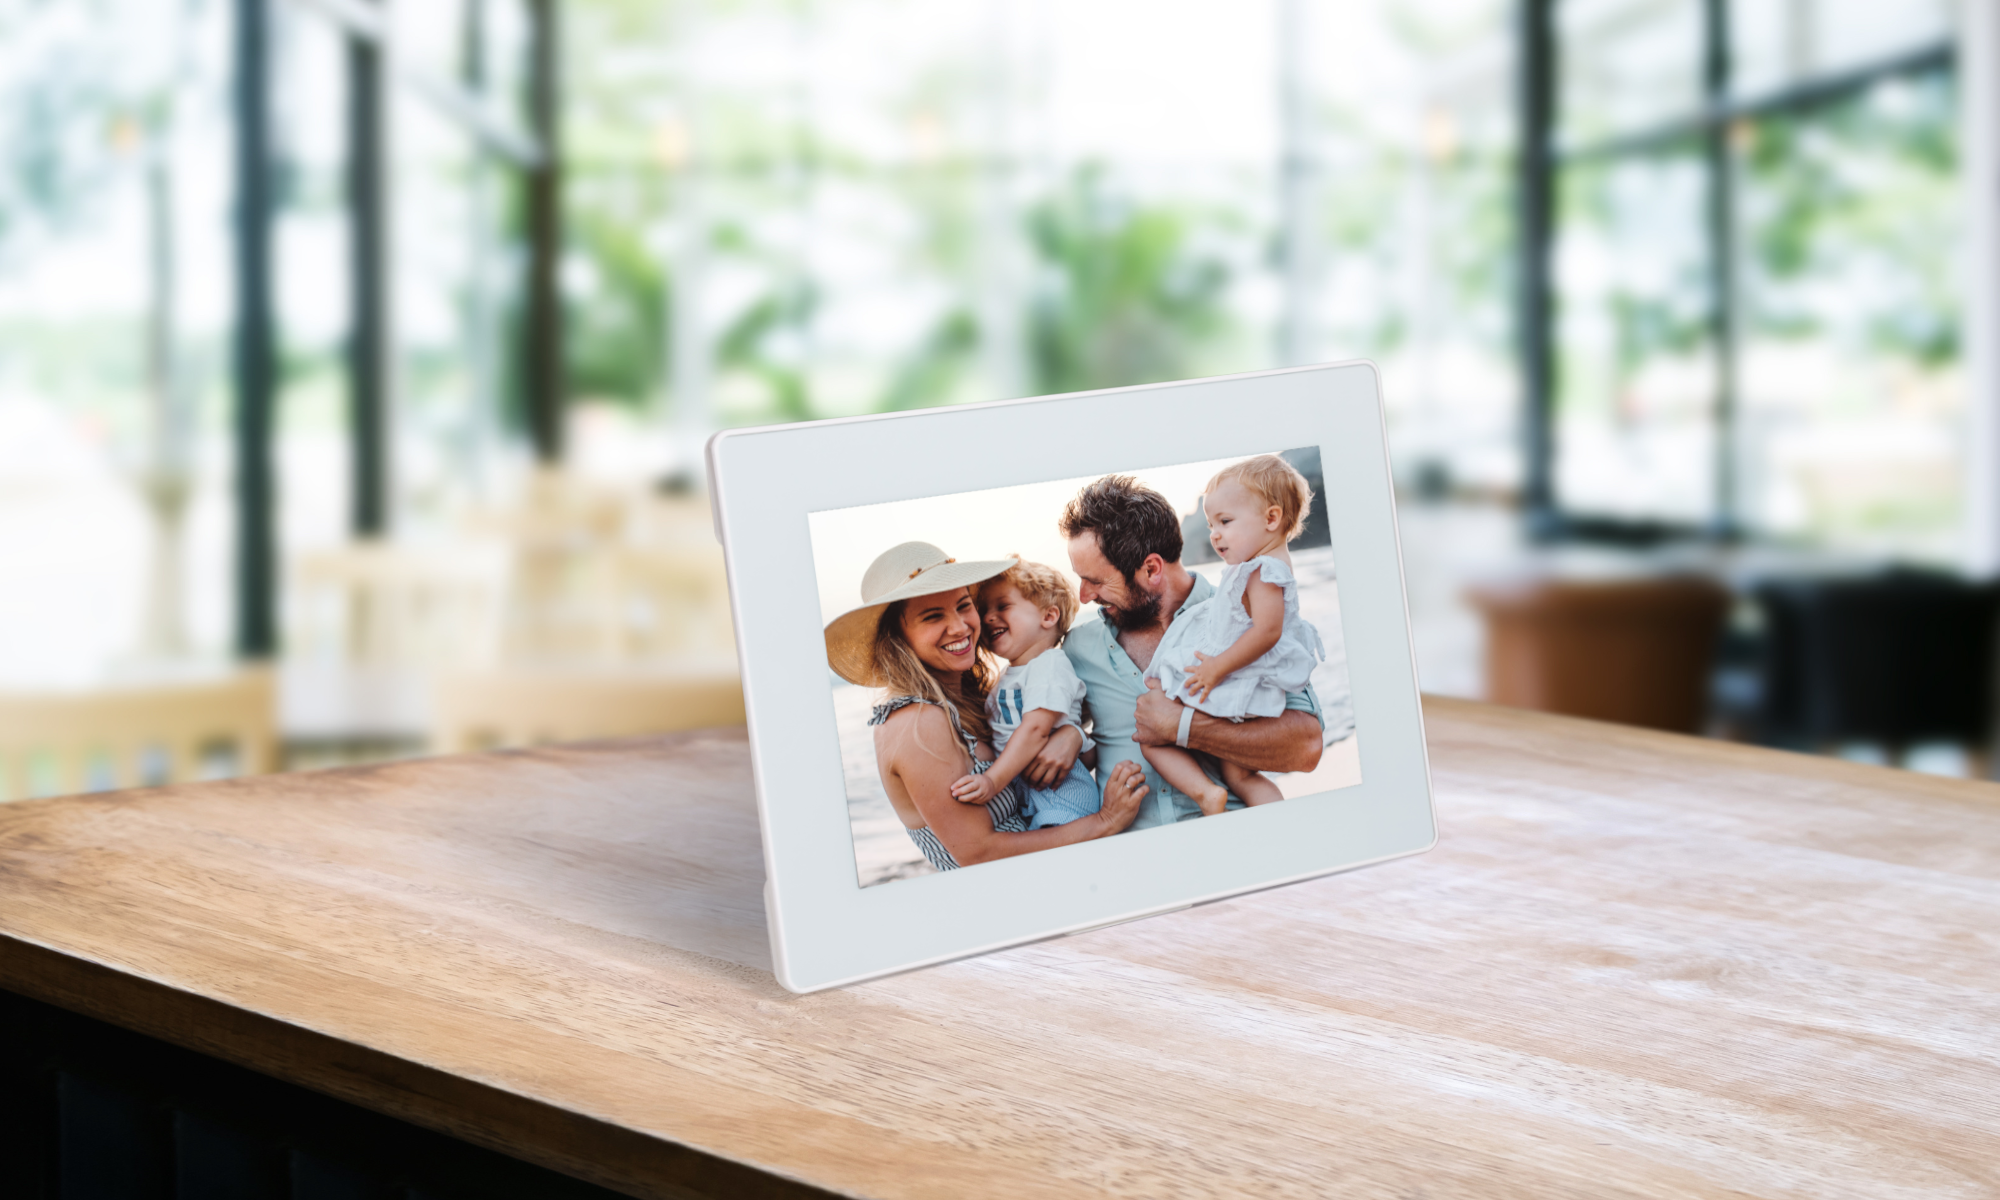 A white digital frame with a family of 4 looking at each other and smiling